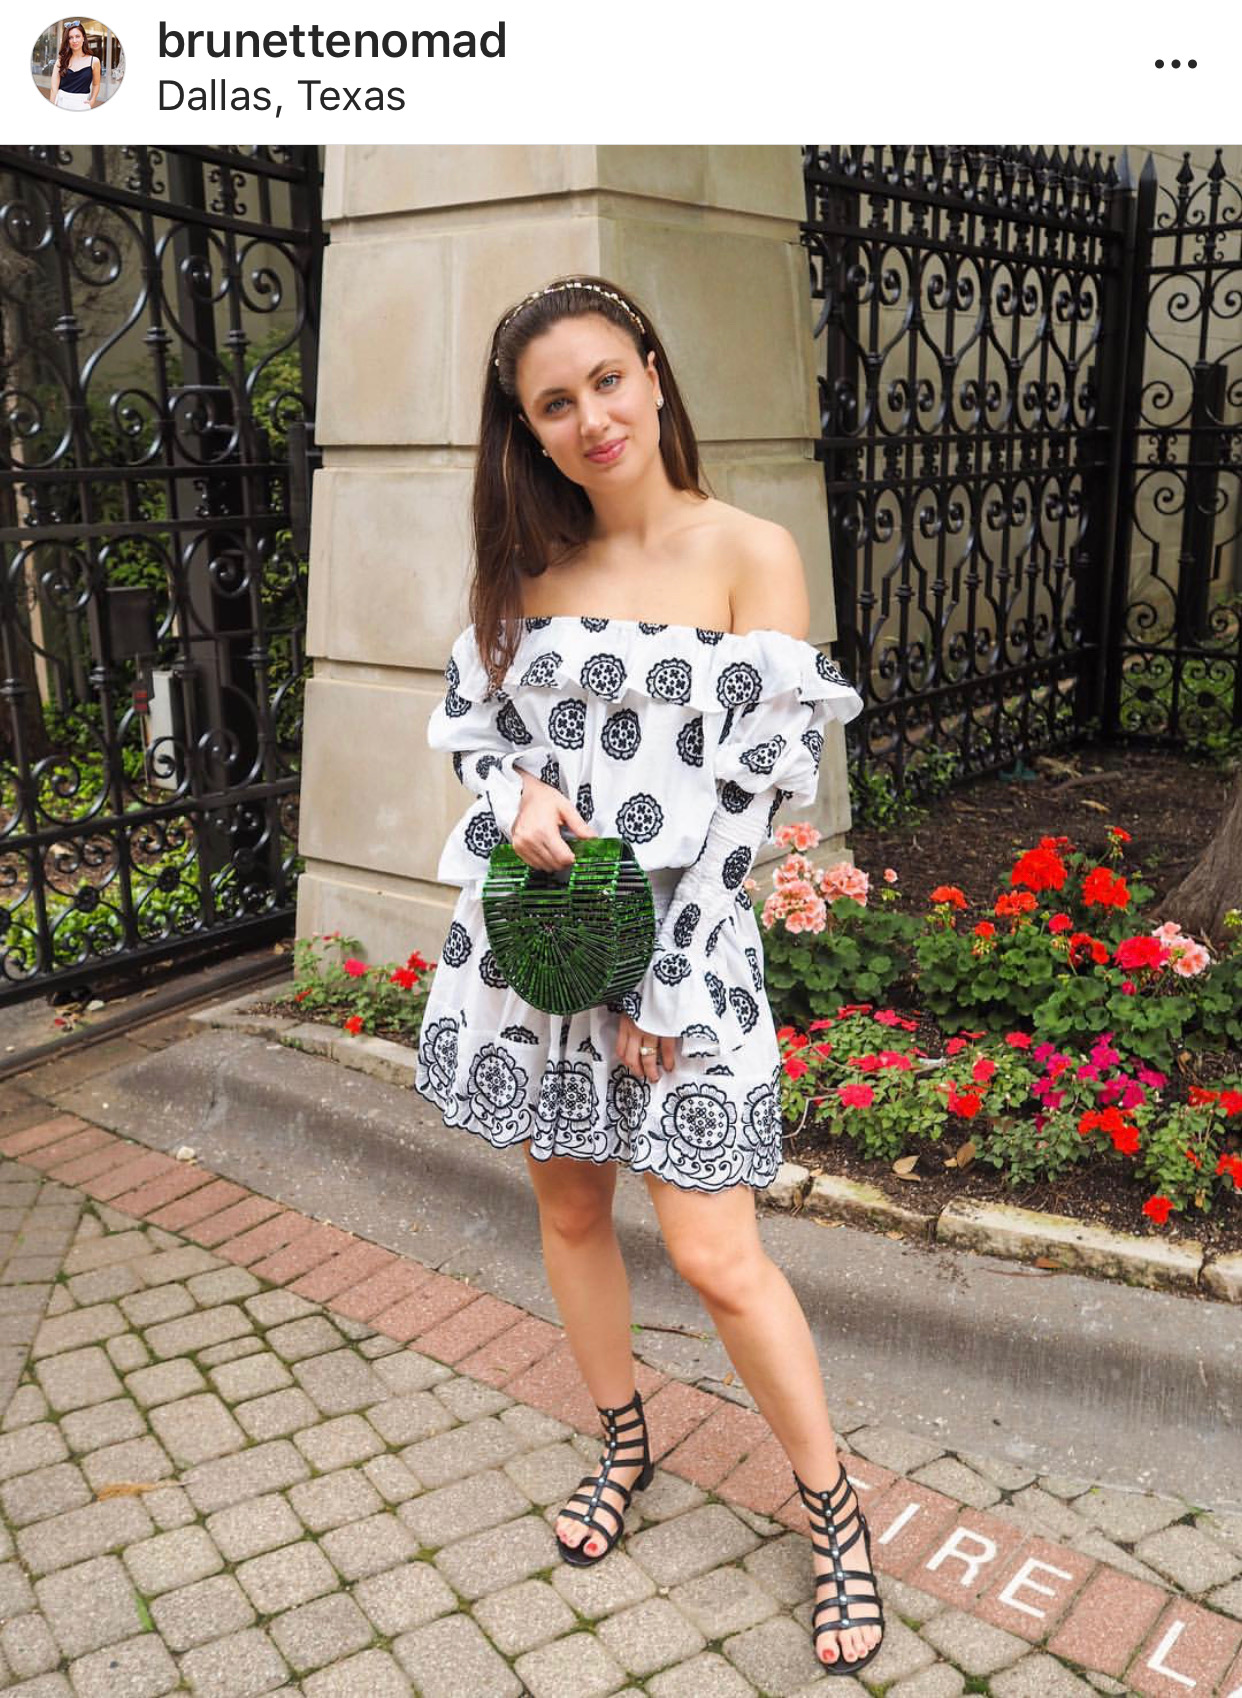 Dallas fashion blogger shares her May Instagram outfit recap and how you can recreate her looks